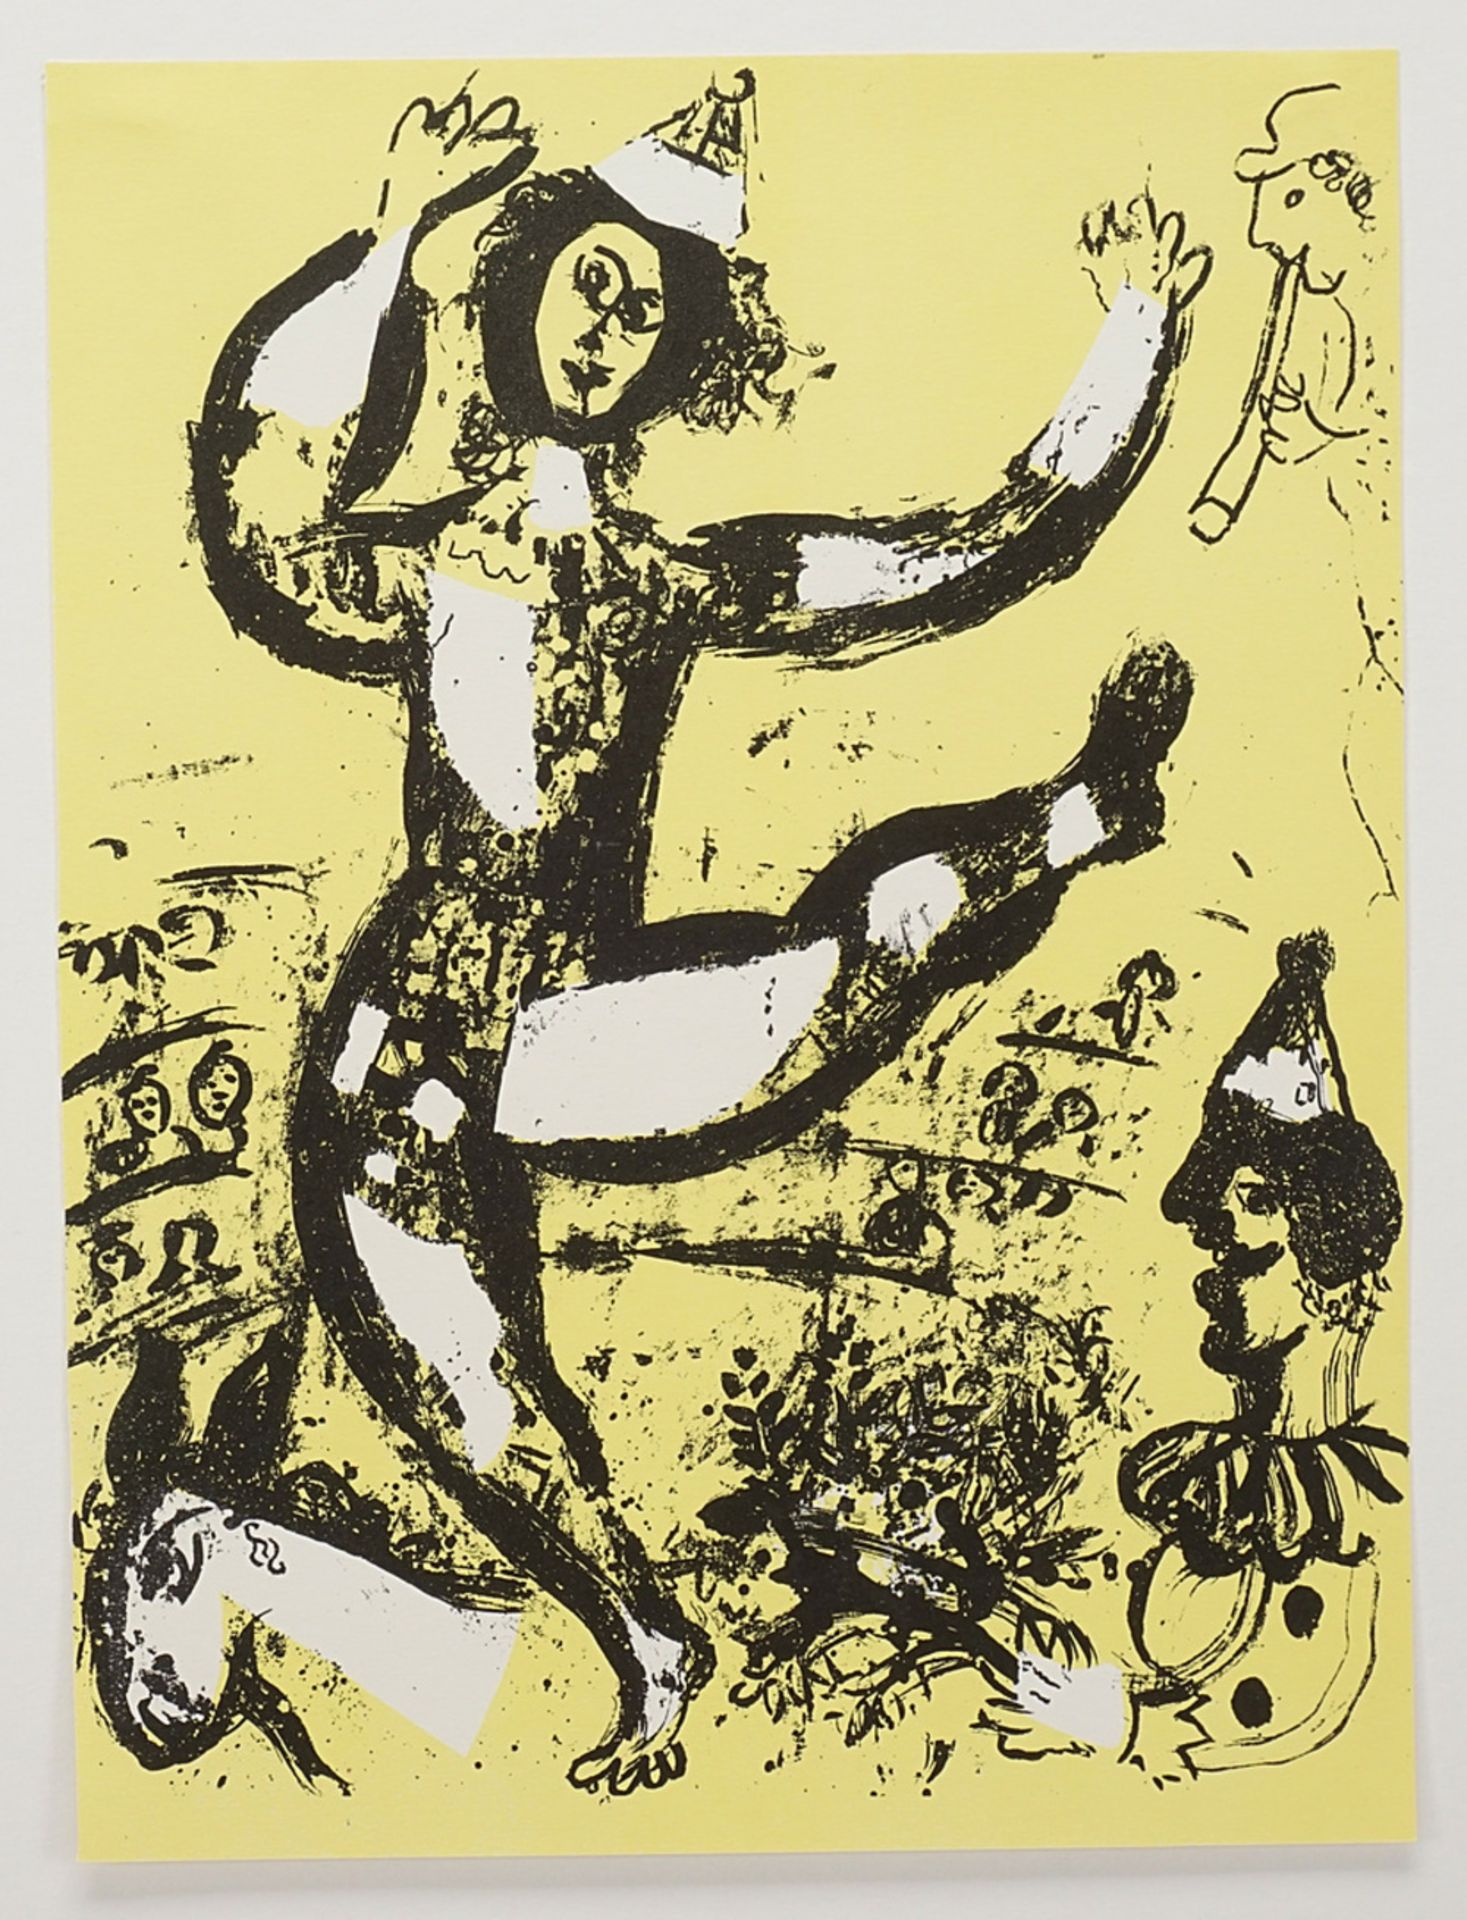 Marc Chagall (1887-1985), "Le Cirque" (The Circus) - Image 3 of 3